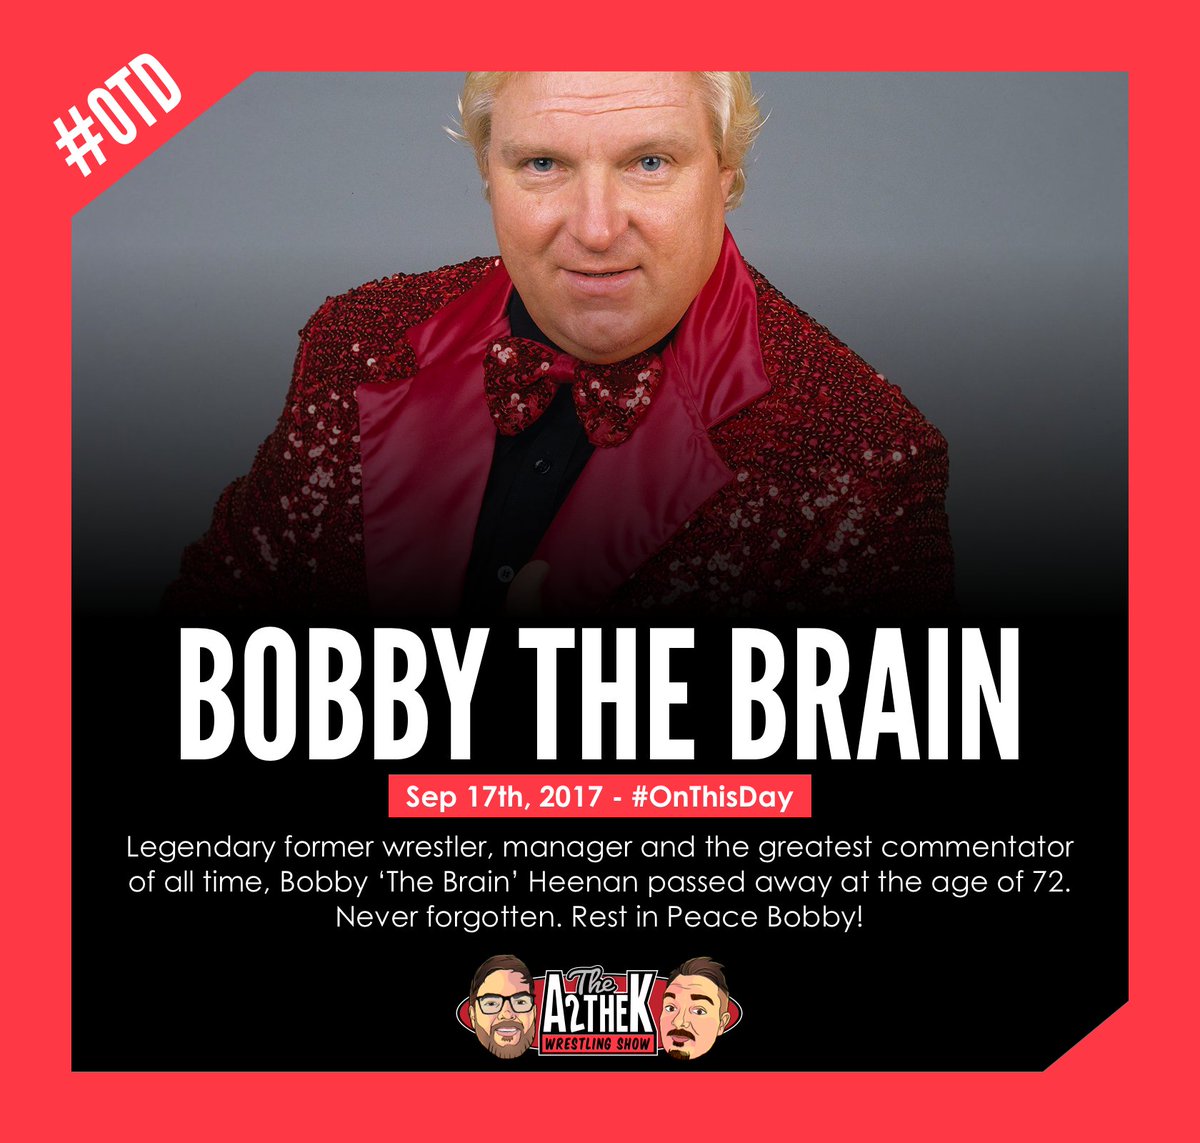 📆 #OTD - We lost the greatest commentator of all time, the irreplaceable #BobbyTheBrainHeenan - there will never be another like him. Rest in Peace Bobby 💜 #bobbyheenan #wwf #wcw #wwe #royalrumble1992 #bestcommentator #wweraw #smackdown #wcwnitro #prowrestling